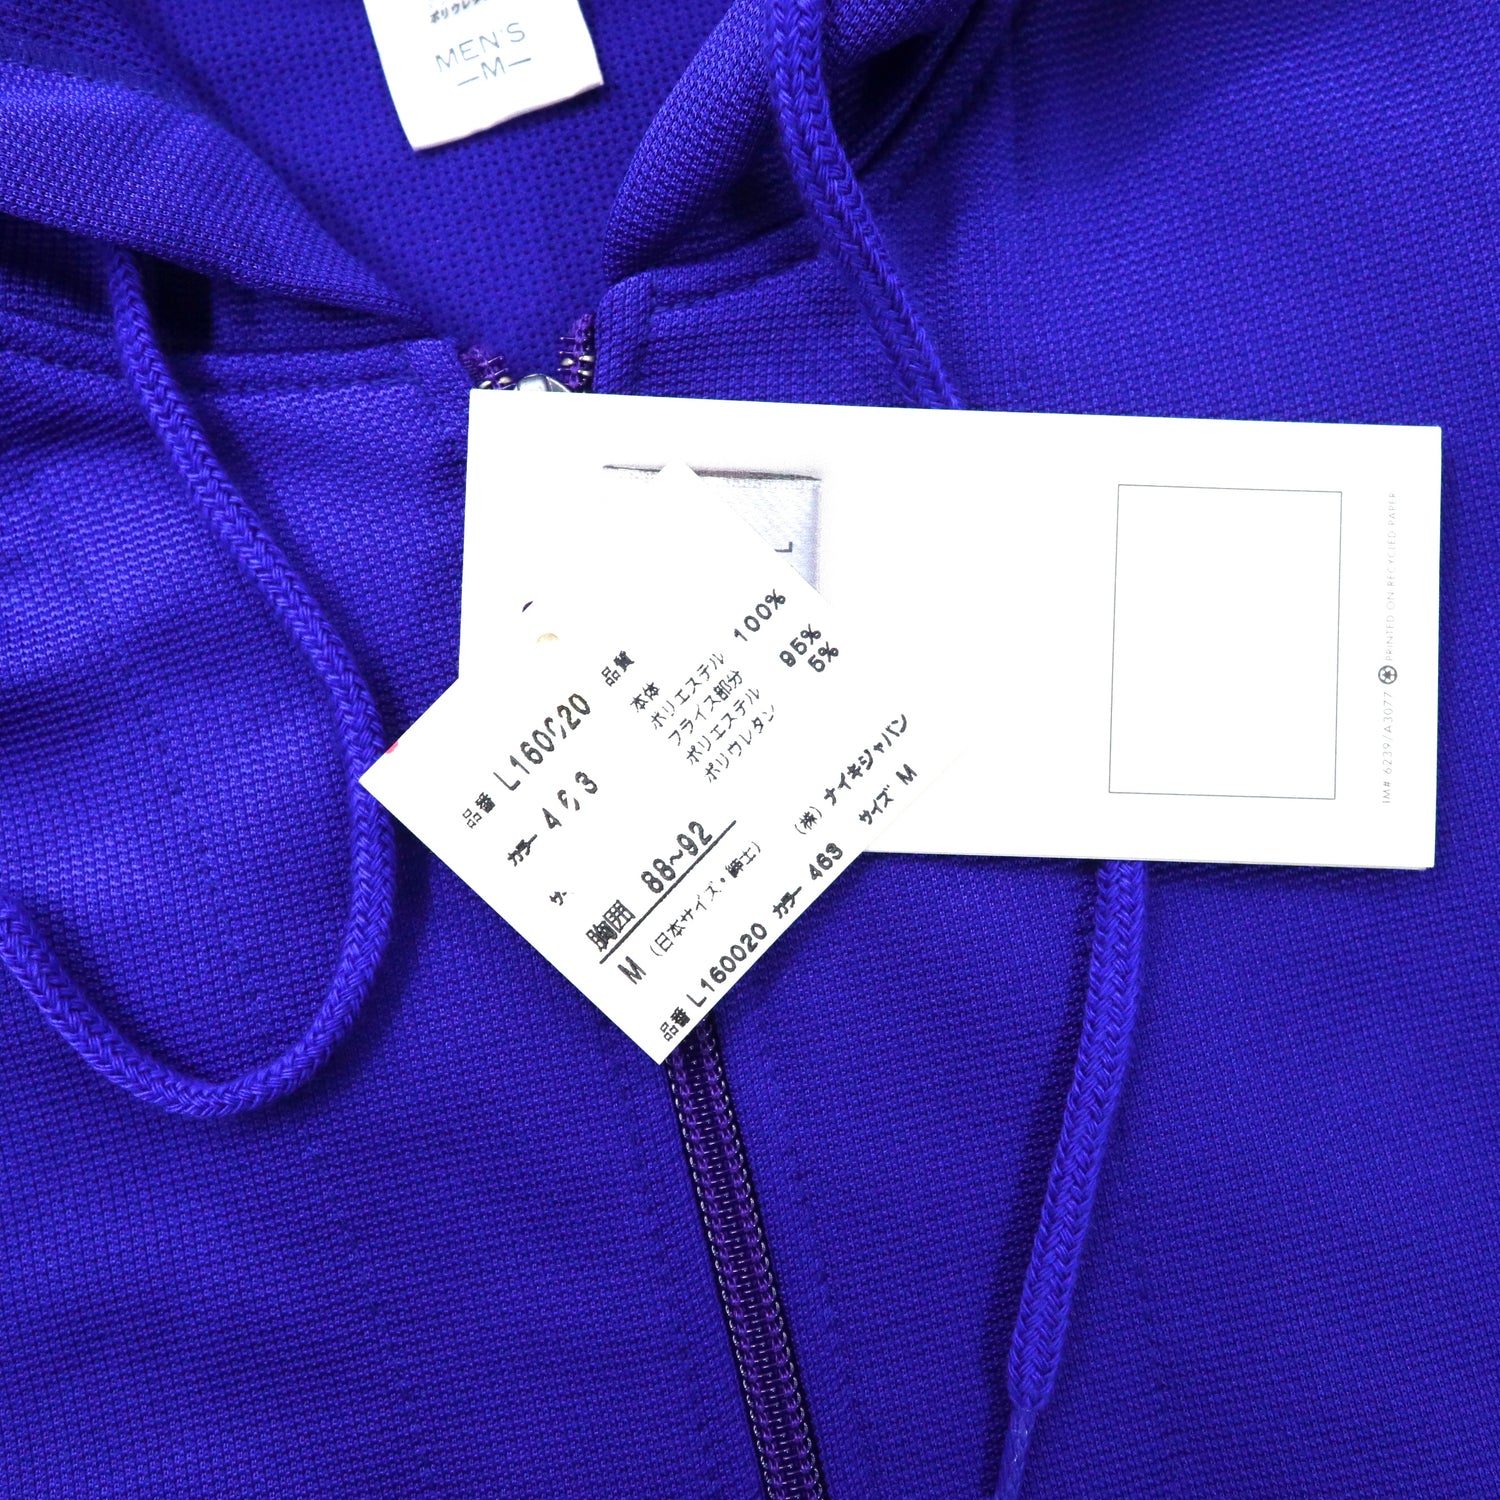 NIKE Half Zip Up Hoodie M Blue Polyester Double -sided Swash logo ...